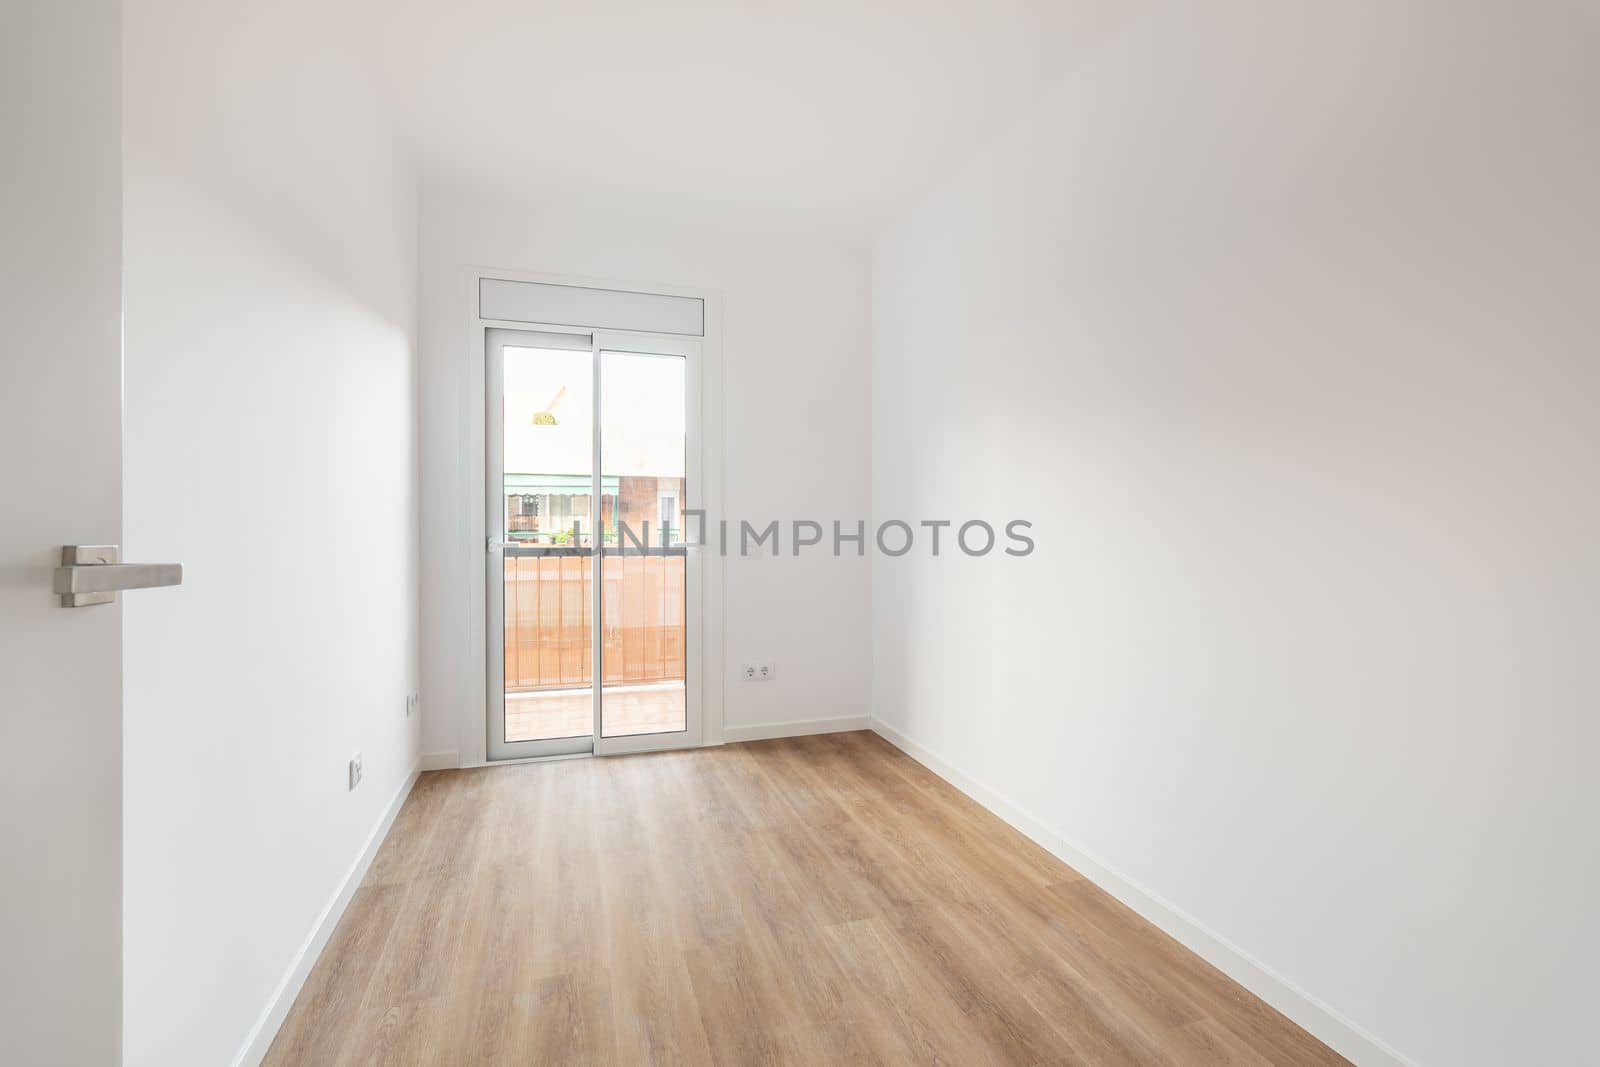 Bright room with white walls, light brown wooden parquet. The room has sliding glass doors in a metal frame with access to a balcony and a view of the neighboring house. Room for living